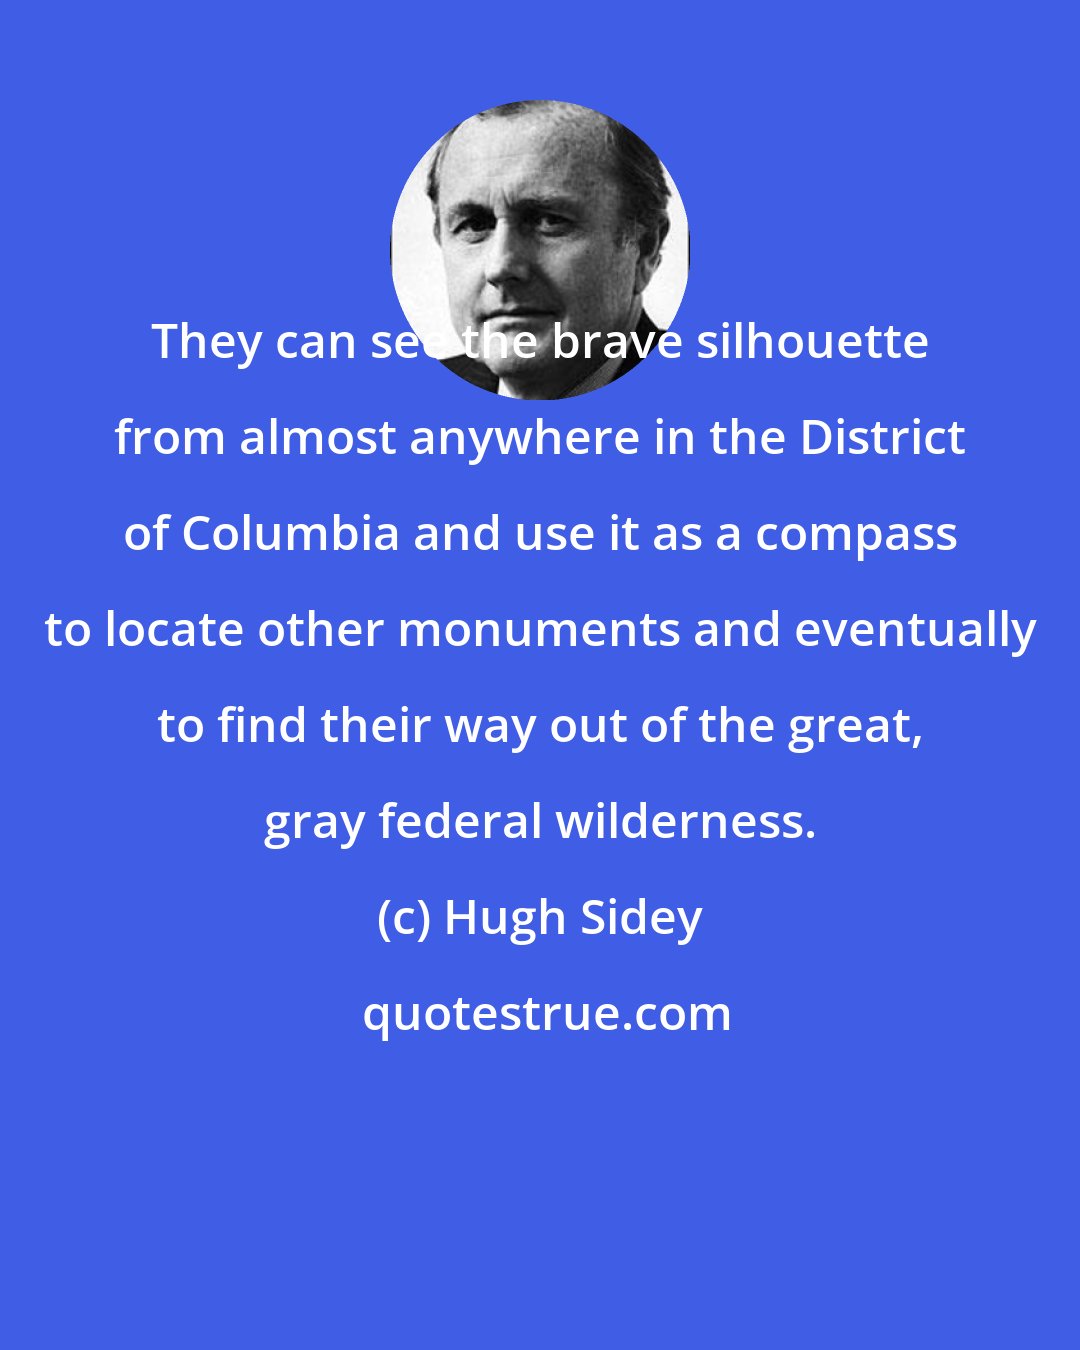 Hugh Sidey: They can see the brave silhouette from almost anywhere in the District of Columbia and use it as a compass to locate other monuments and eventually to find their way out of the great, gray federal wilderness.